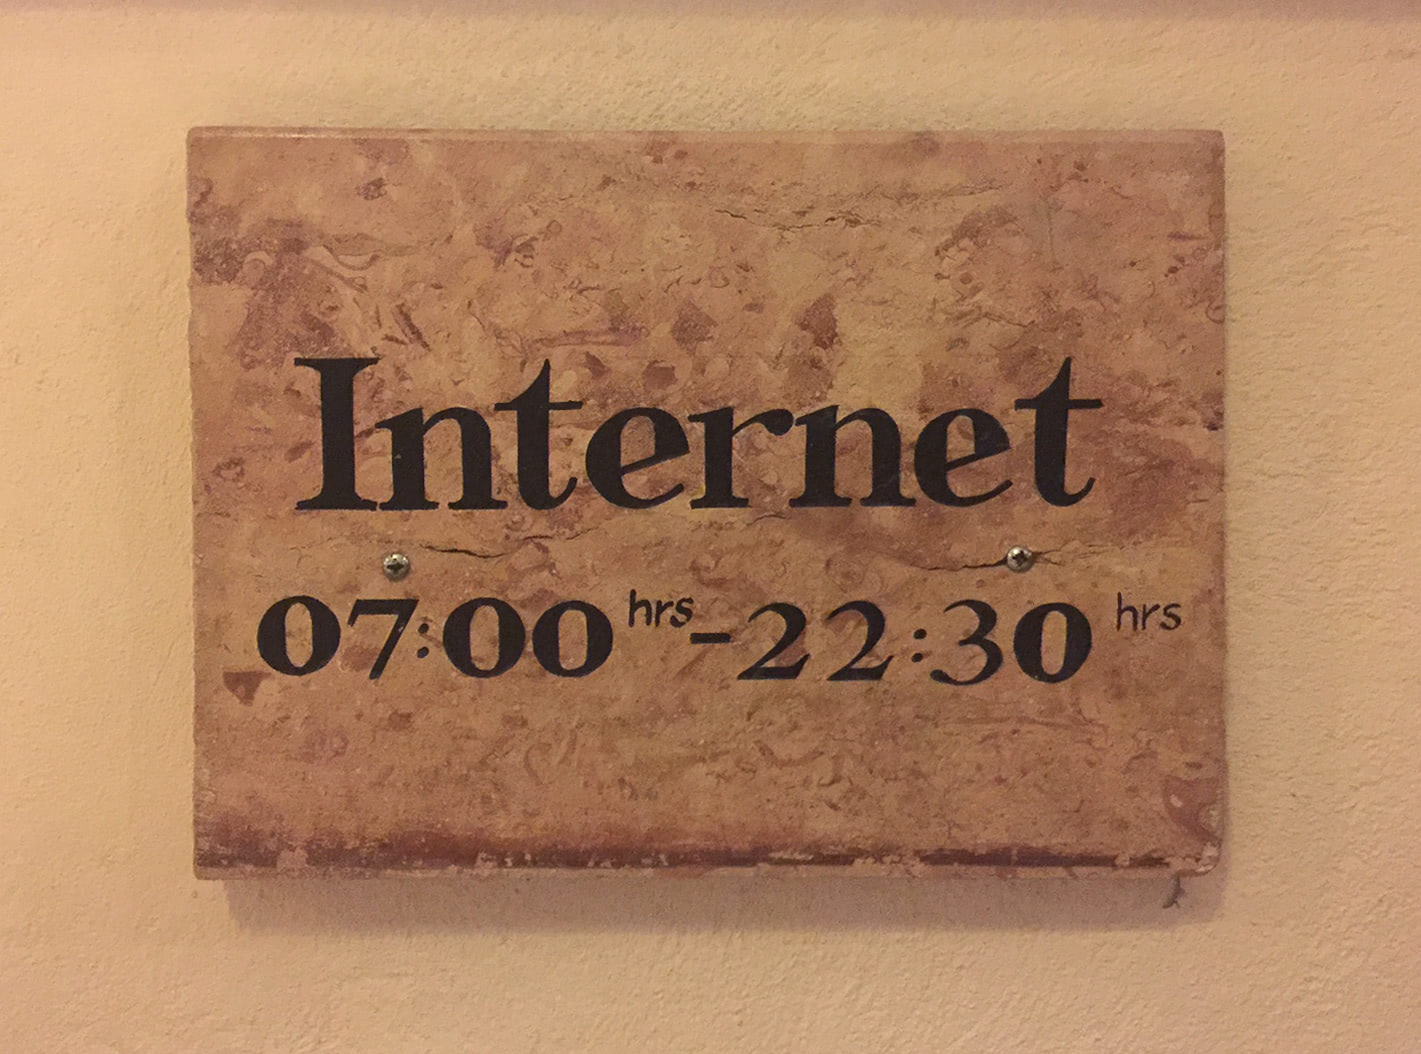 Visual of Internet Open Daily from 7:00 to 22:30